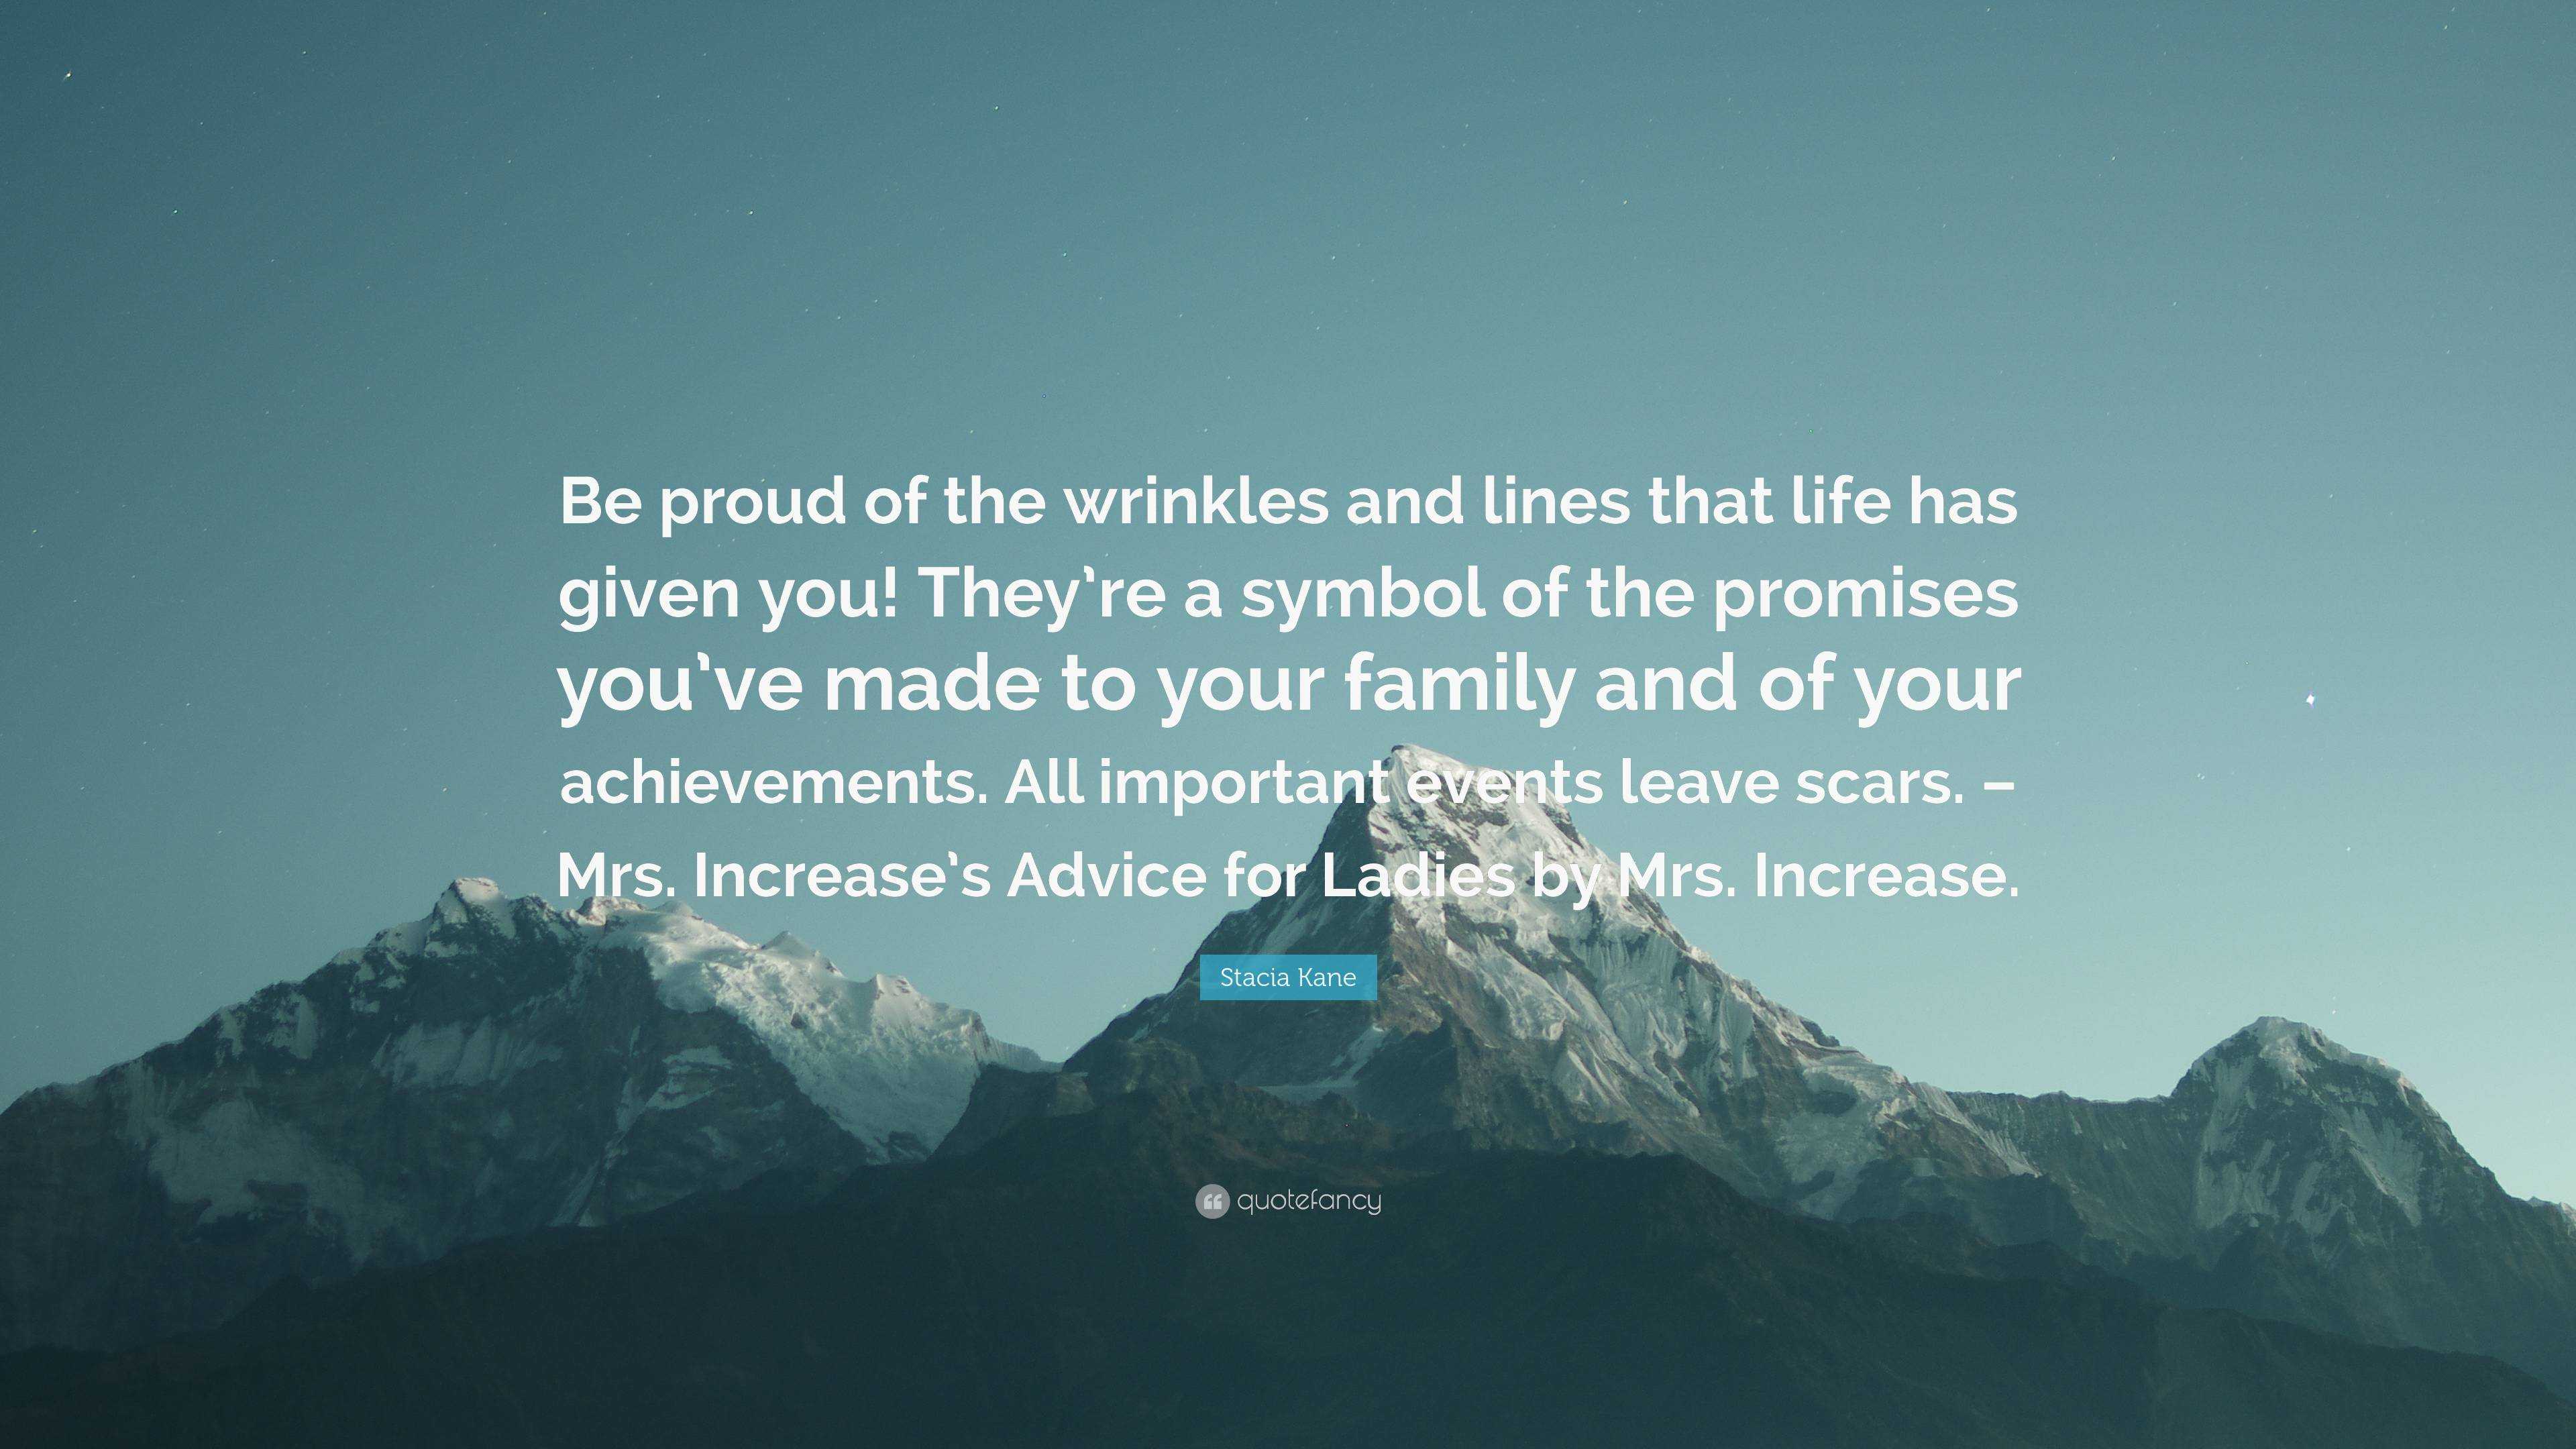 6957429 Stacia Kane Quote Be proud of the wrinkles and lines that life has